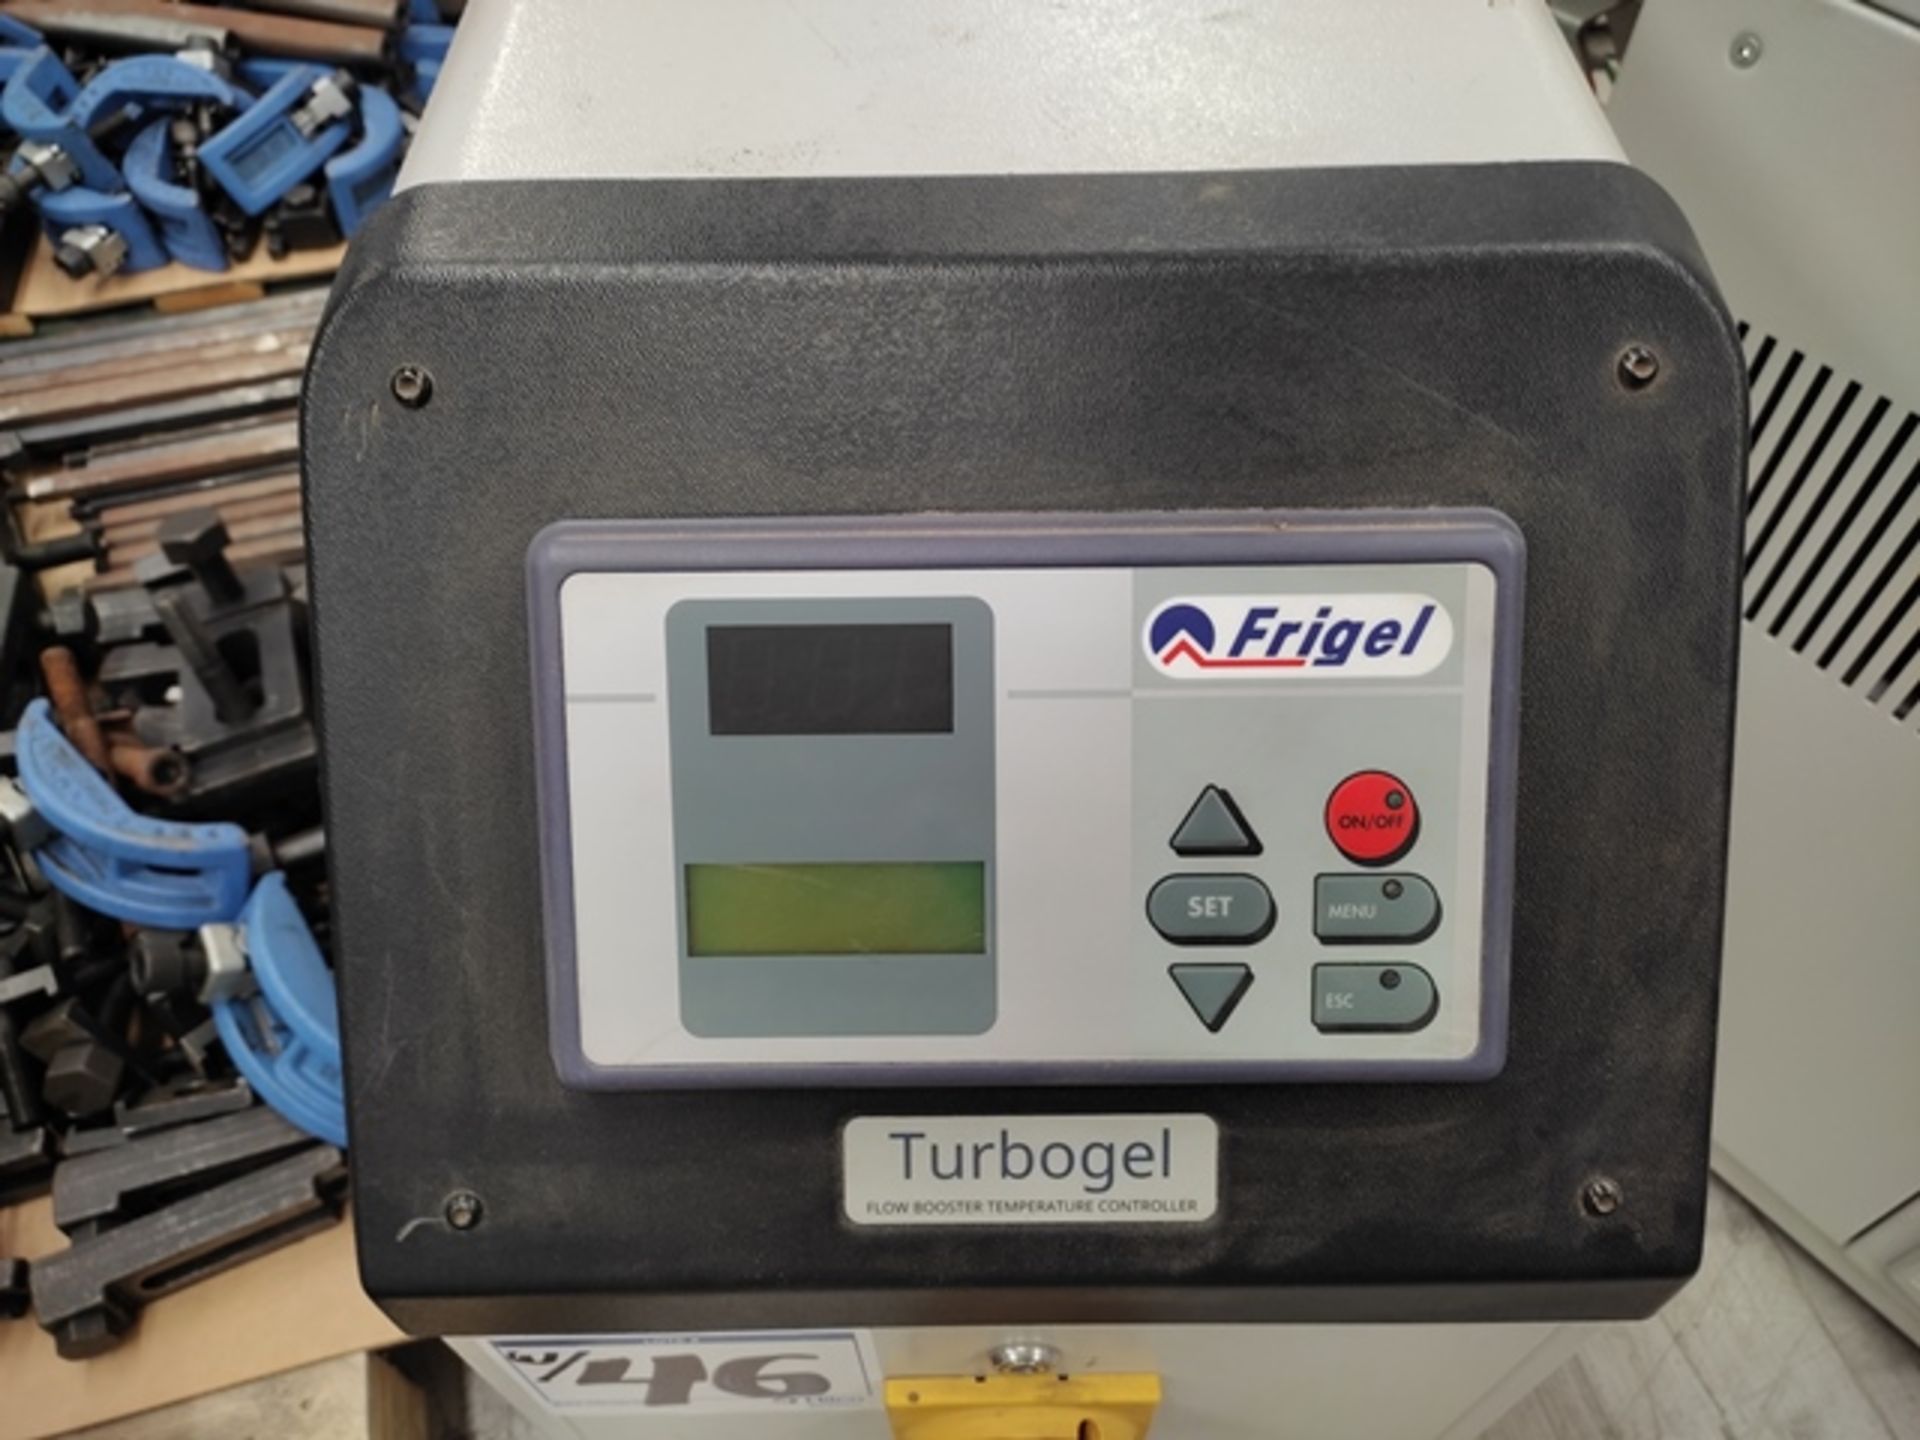 Lot of: (2) Frigel RBM130/24 SP 24 KW Flow Booster Temperature Controllers, Mfg. Year: 2017 - Image 7 of 9